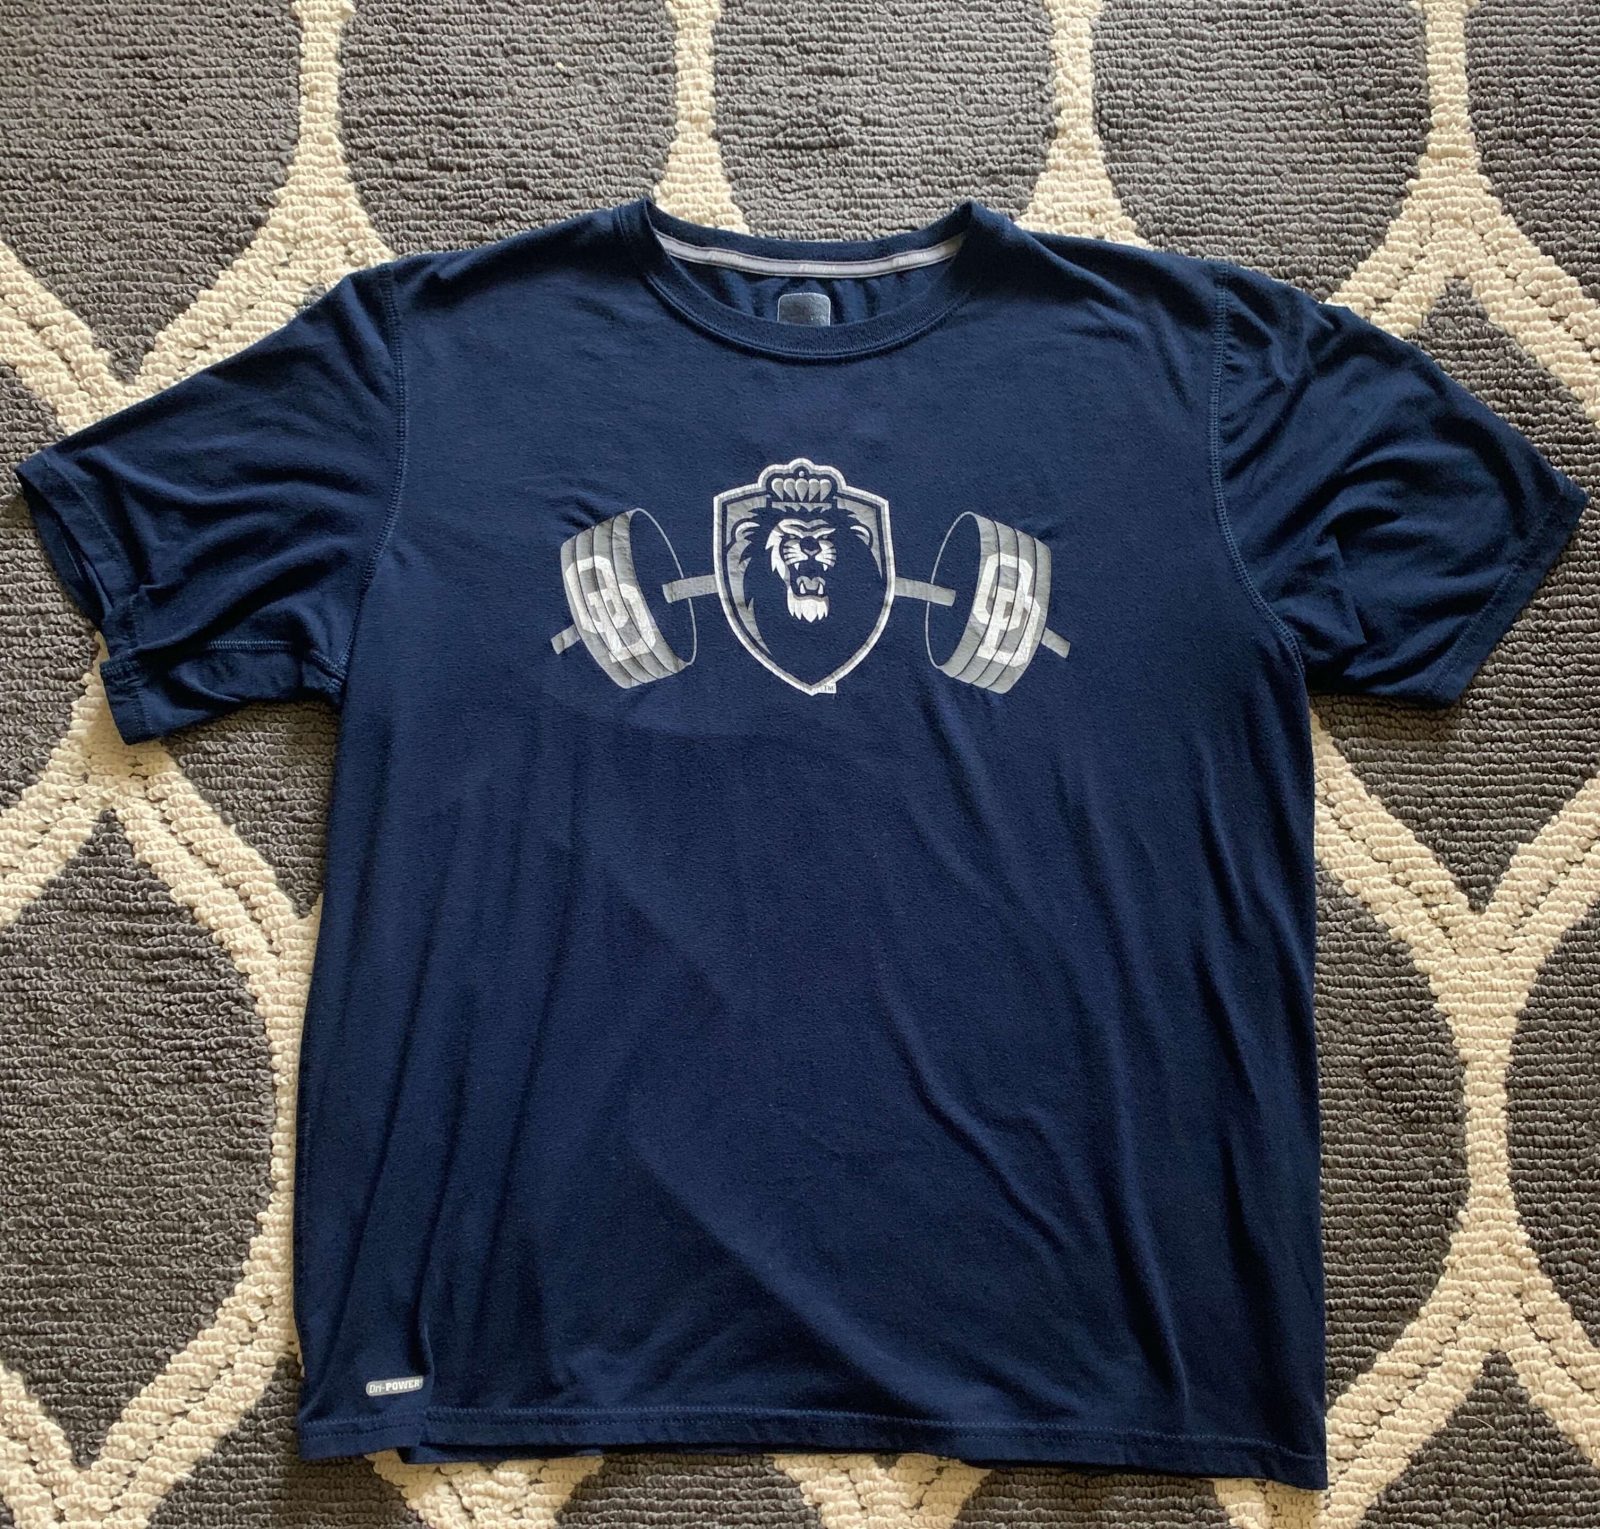 Old Dominion Weightlifting Tee : NARP Clothing